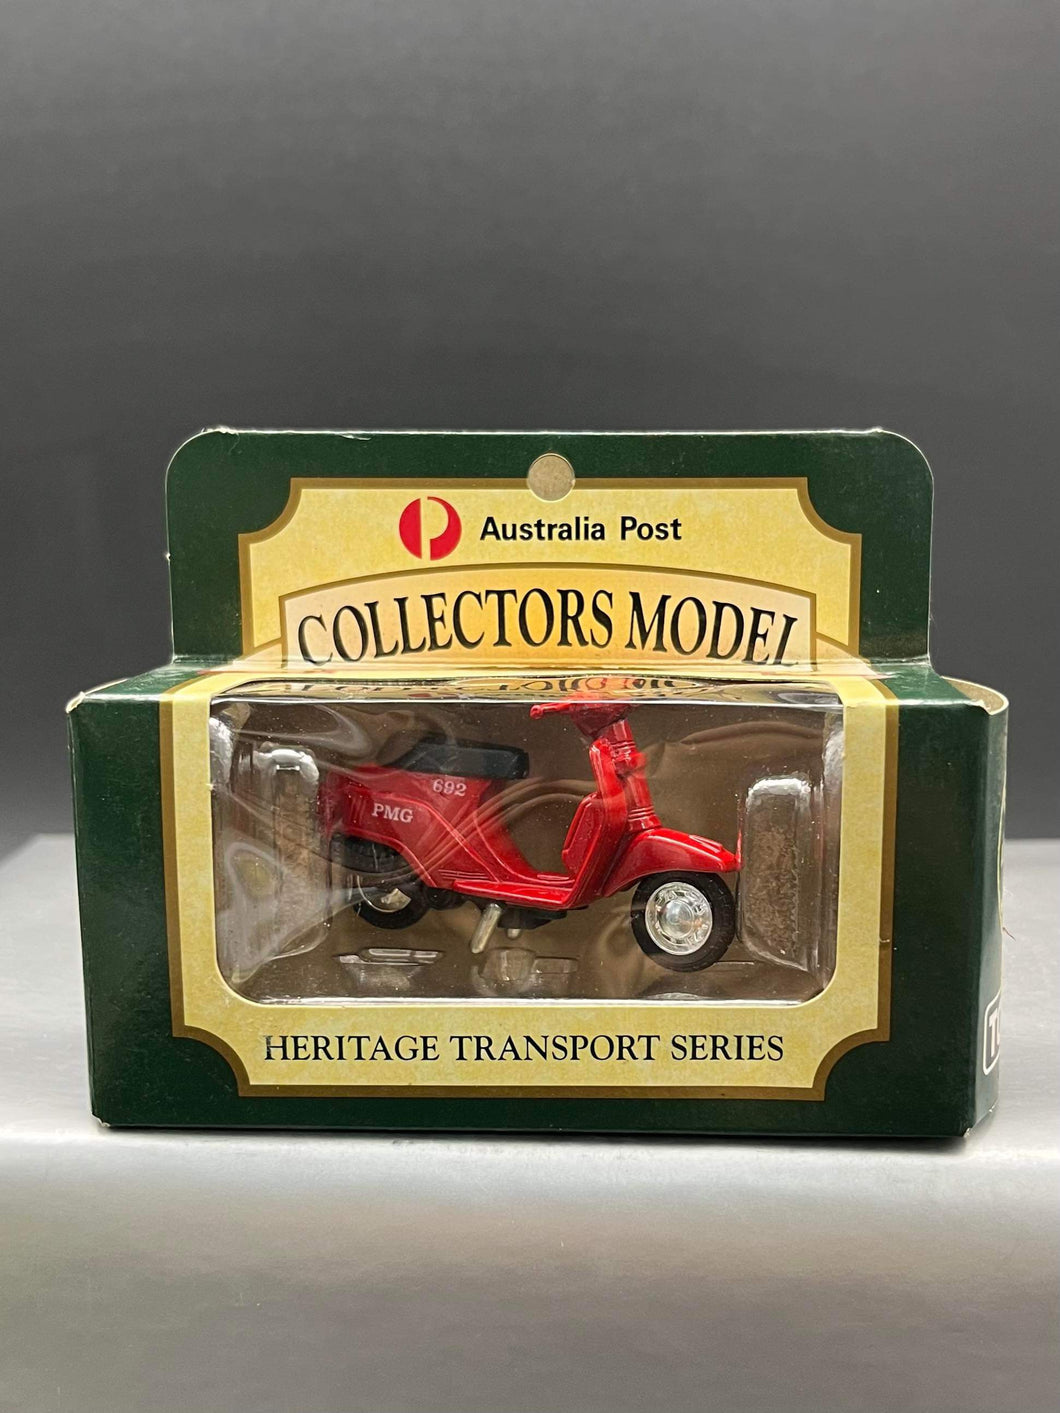 Matchbox - Heritage Transport Series - No.2 PMG Scooter